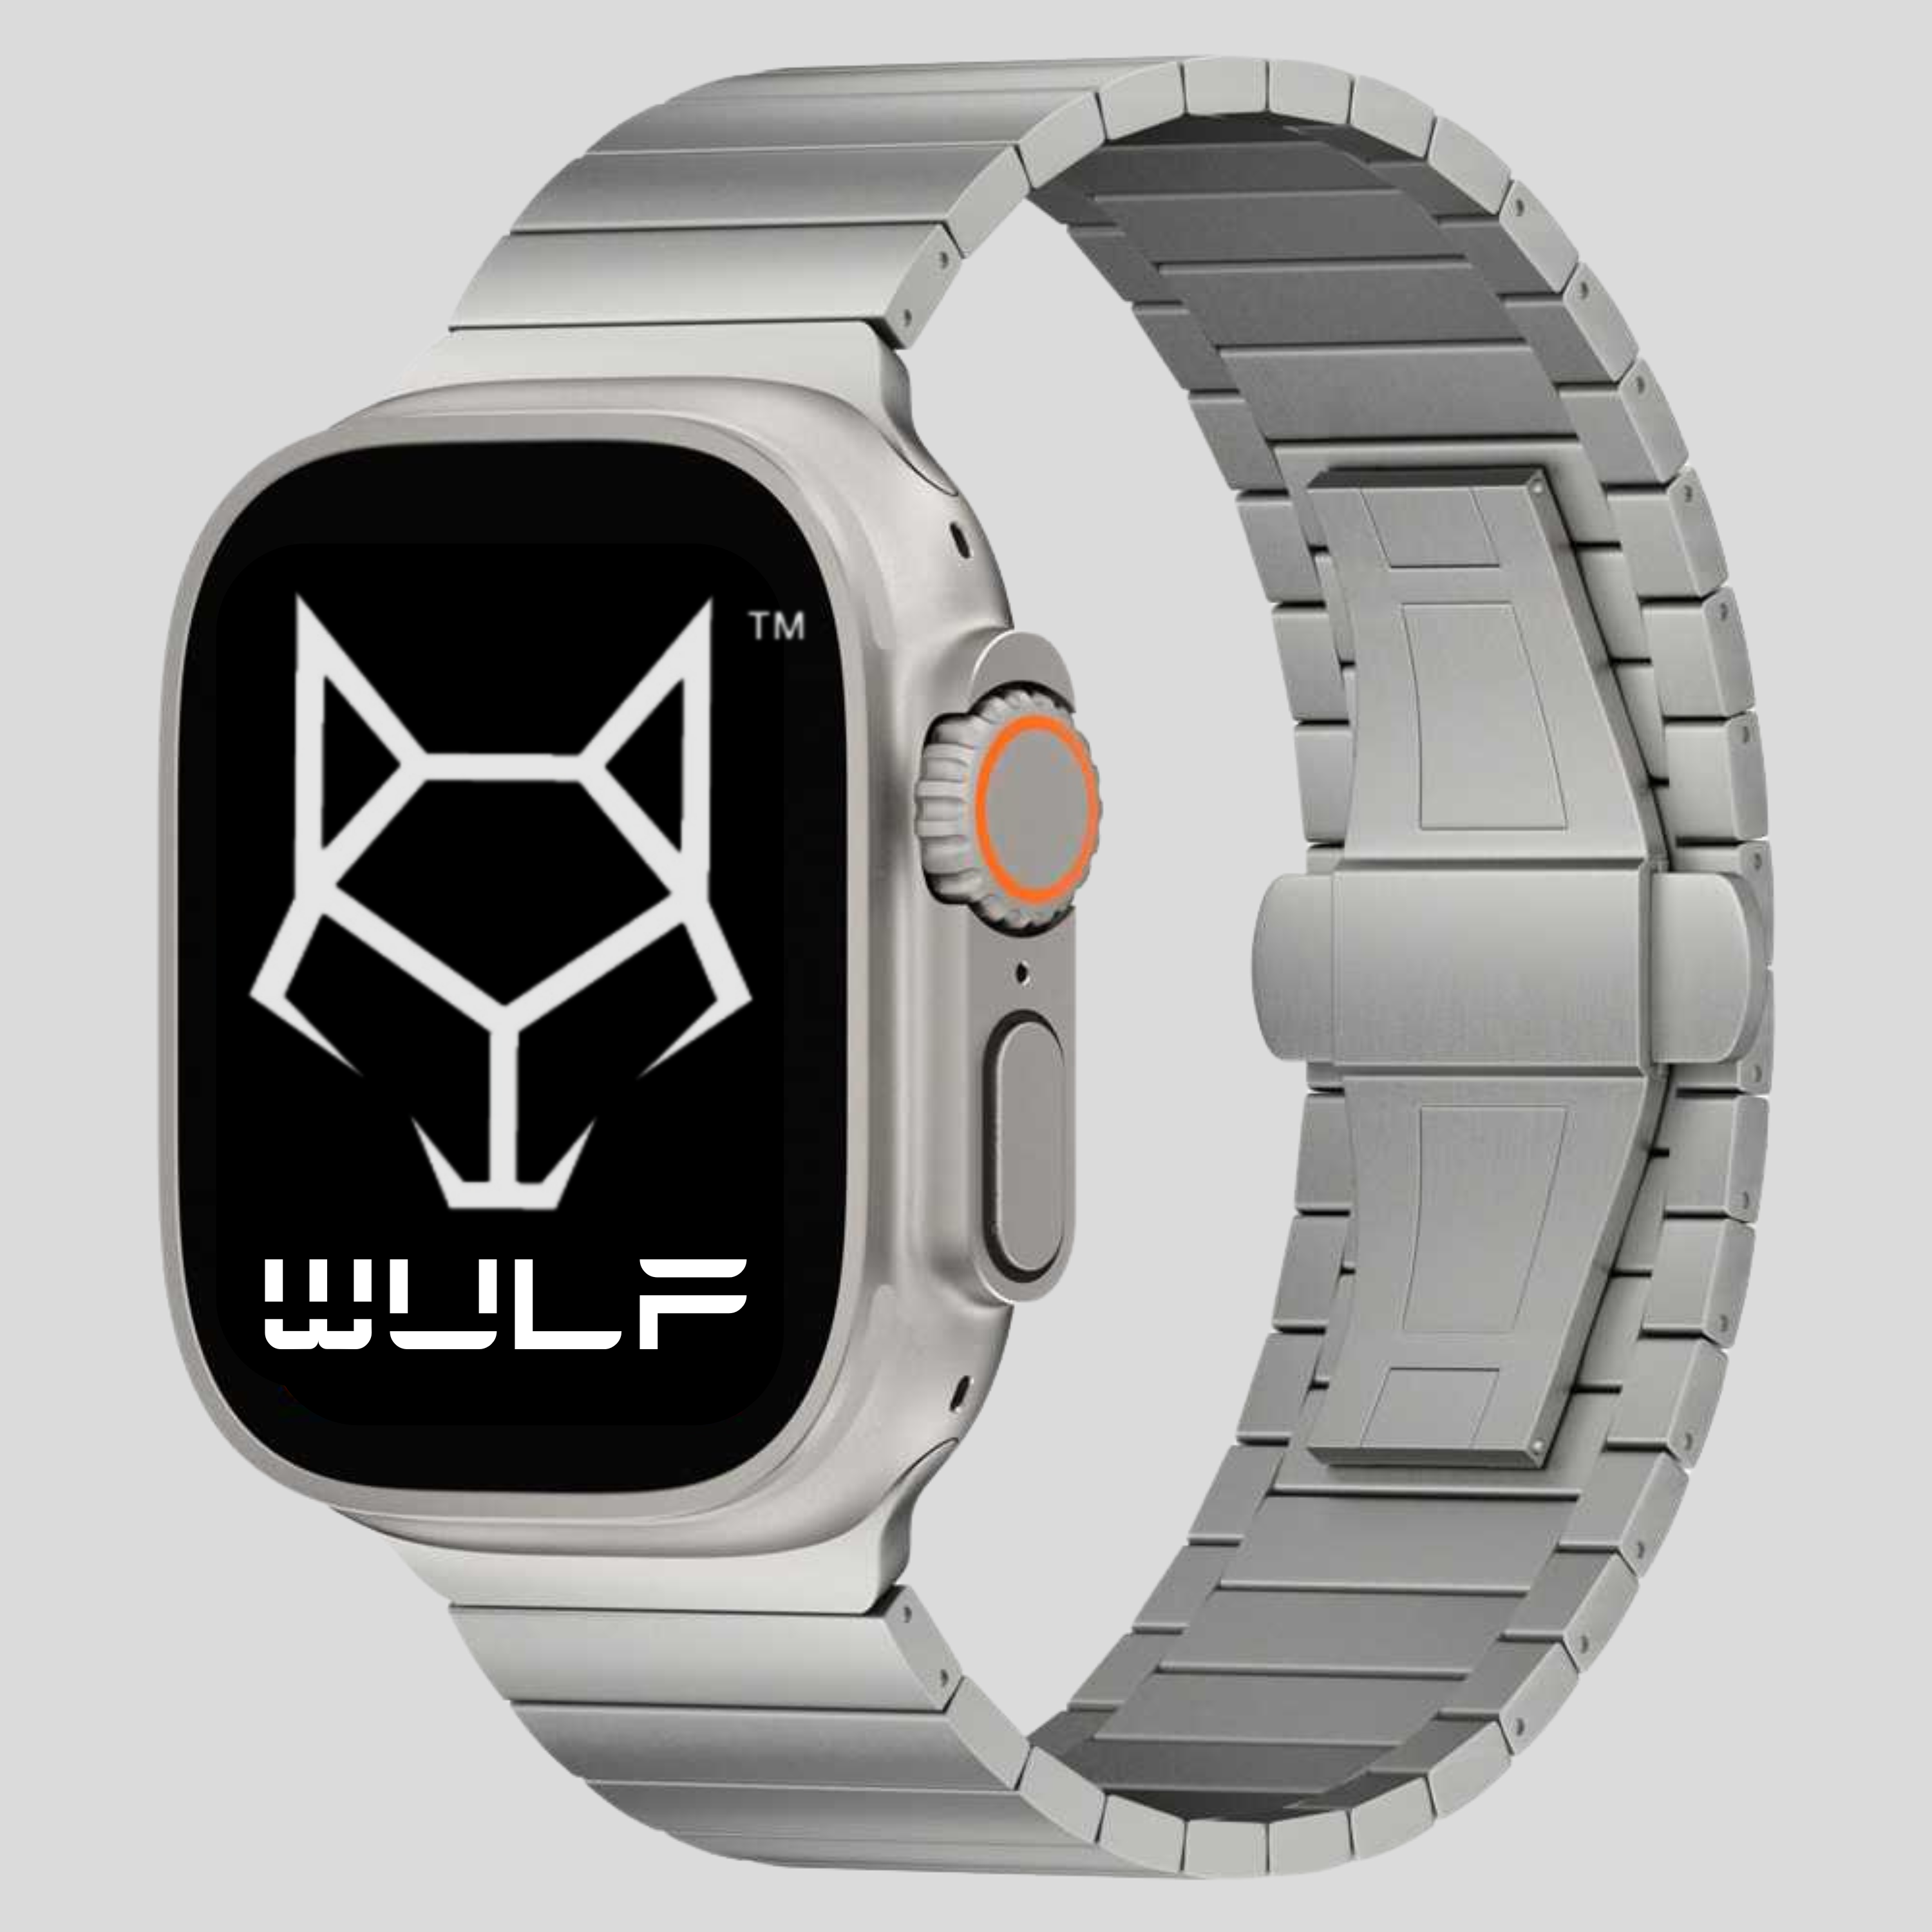 WULF Titanium Elite Watch Band - Made for the Apple Watch